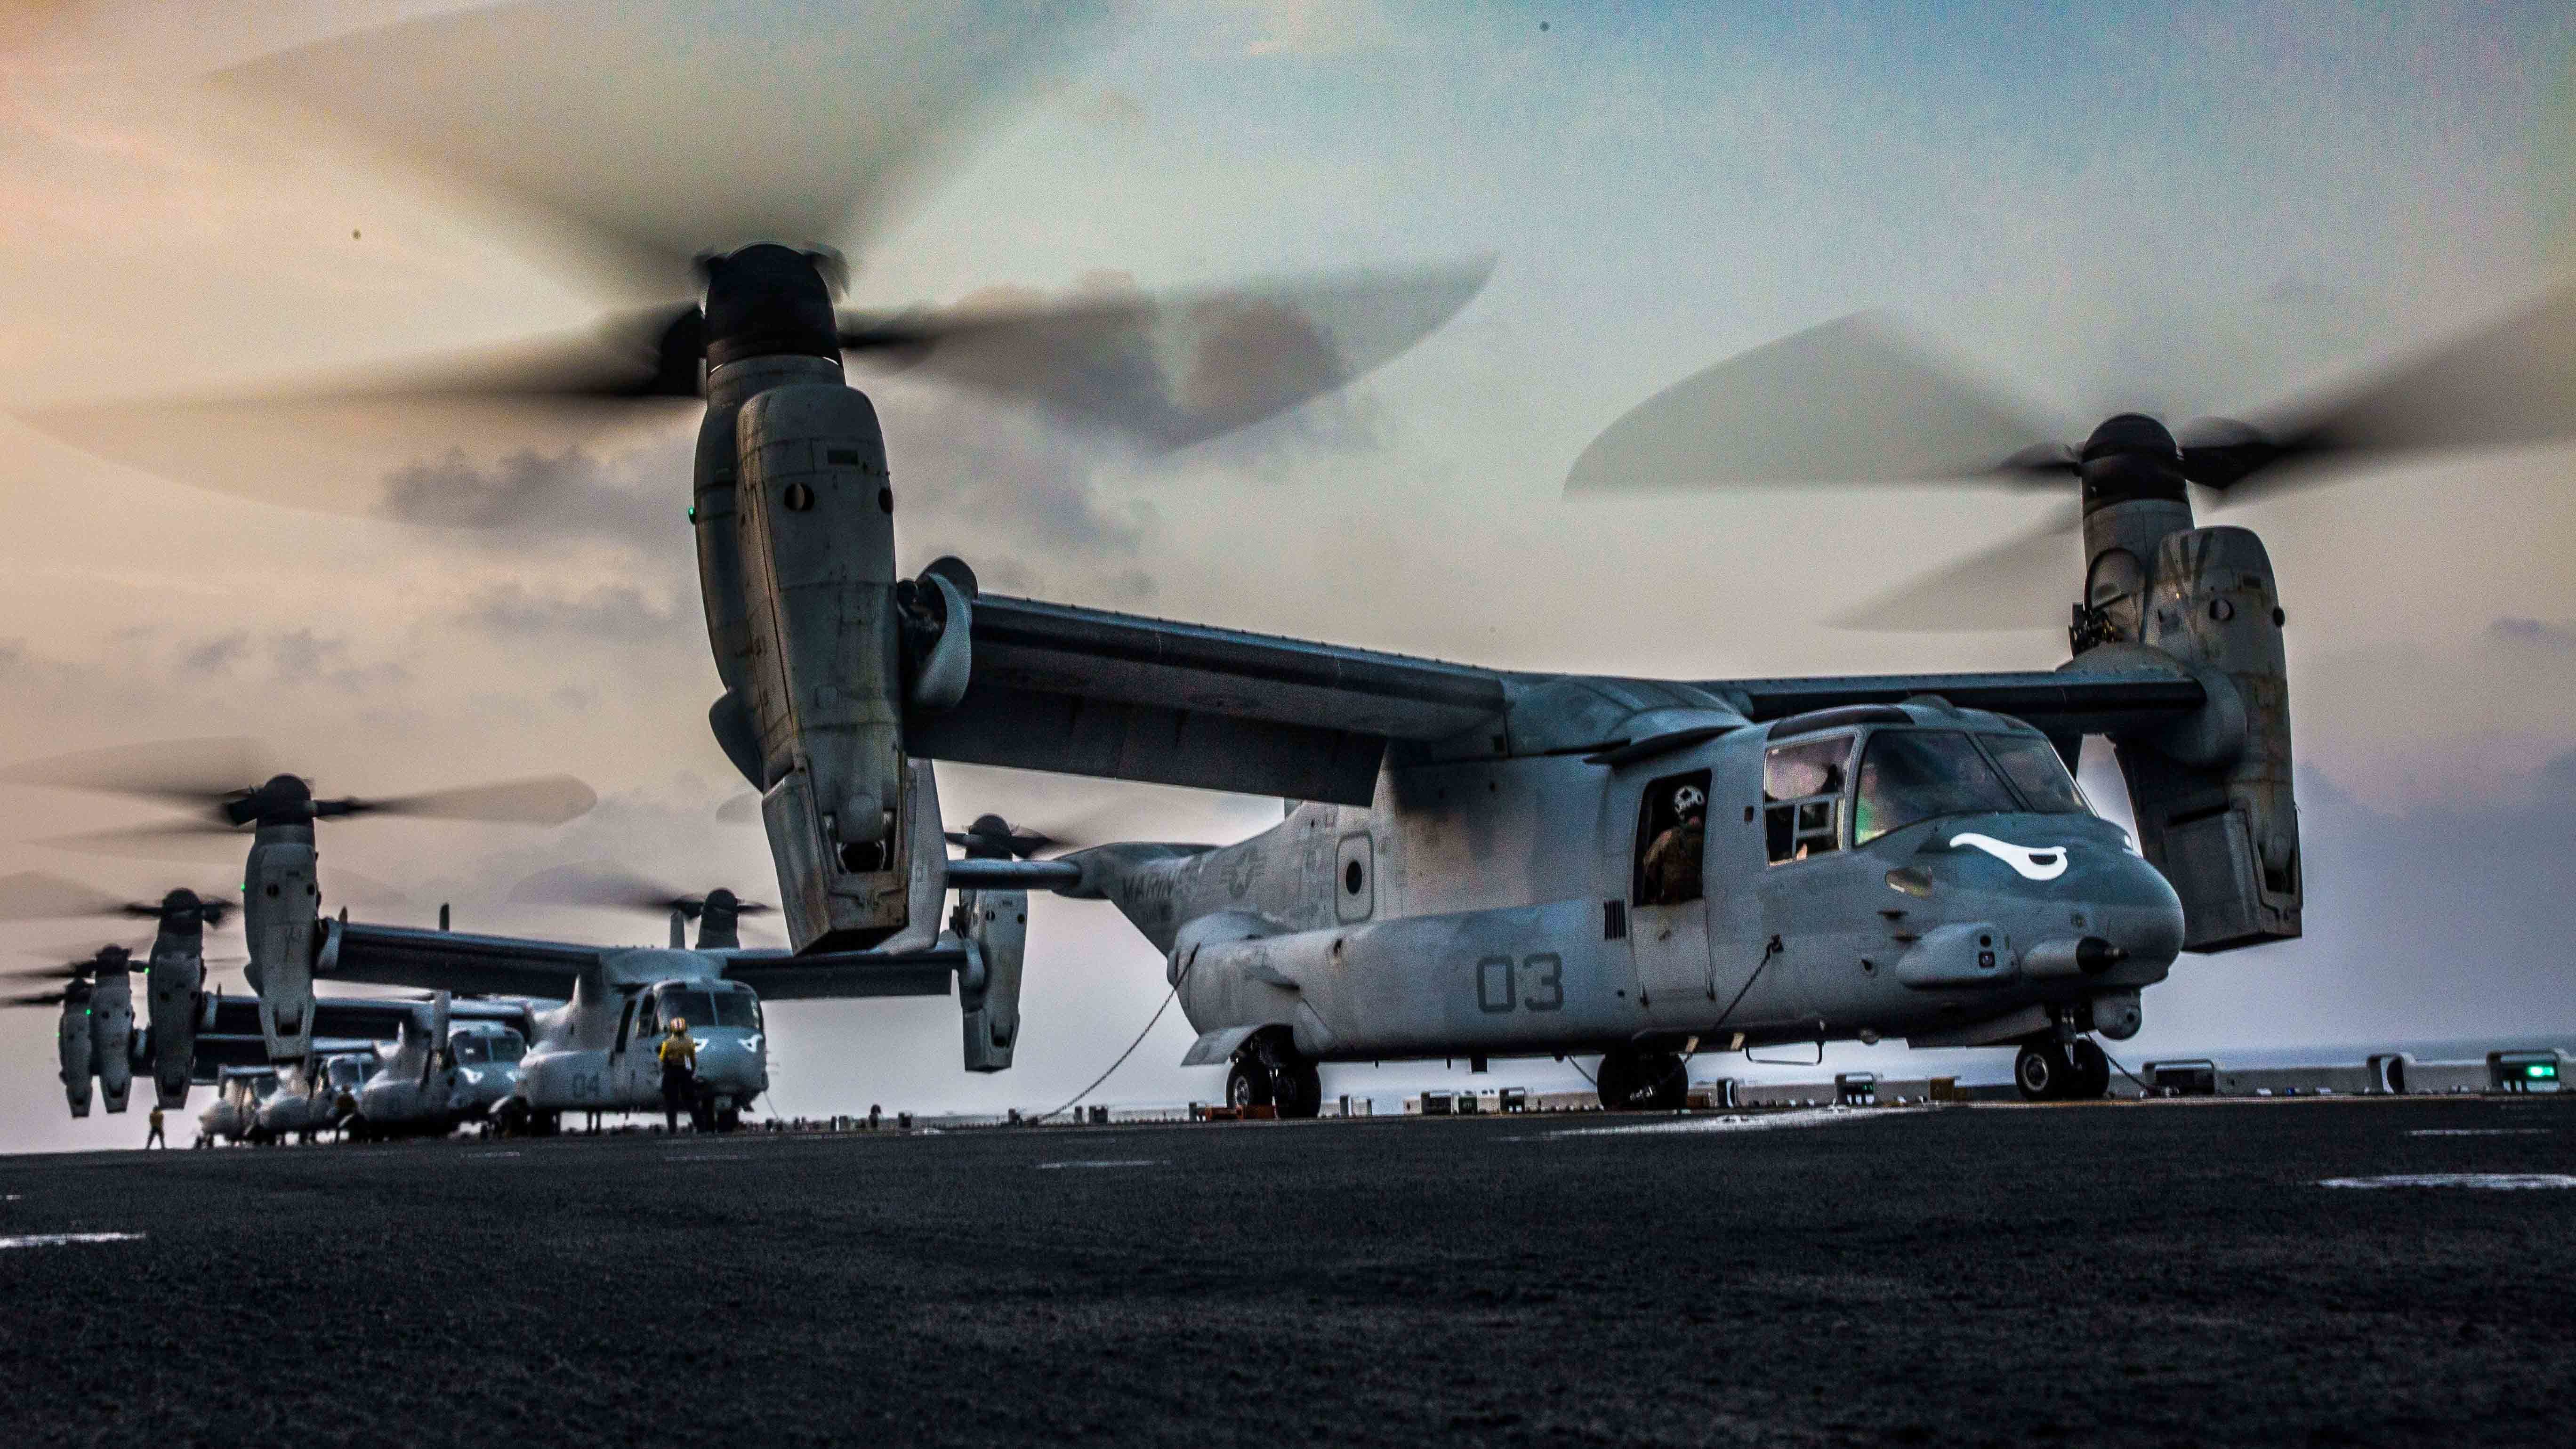 U.S. Marine MV-22 Ospreys, assigned to the Ridge Runners of Marine Medium Tiltrotor Squadron 163 (VMM-163)(Reinforced), prepare to takeoff from the flight deck of the amphibious assault ship USS Makin Island (LHD 8) in support of a helo-borne raid during Exercise Alligator Dagger, in the Gulf of Aden, Dec. 21, 2016. The unilateral exercise provides an opportunity for the Makin Island Amphibious Ready Group and 11th Marine Expeditionary Unit to train in amphibious operations within the U.S. 5th Fleet area of operations. The 11th MEU is currently supporting U.S. 5th Fleet’s mission to promote and maintain stability and security in the region. (U.S. Marine Corps photo by Lance Cpl. Brandon Maldonado)